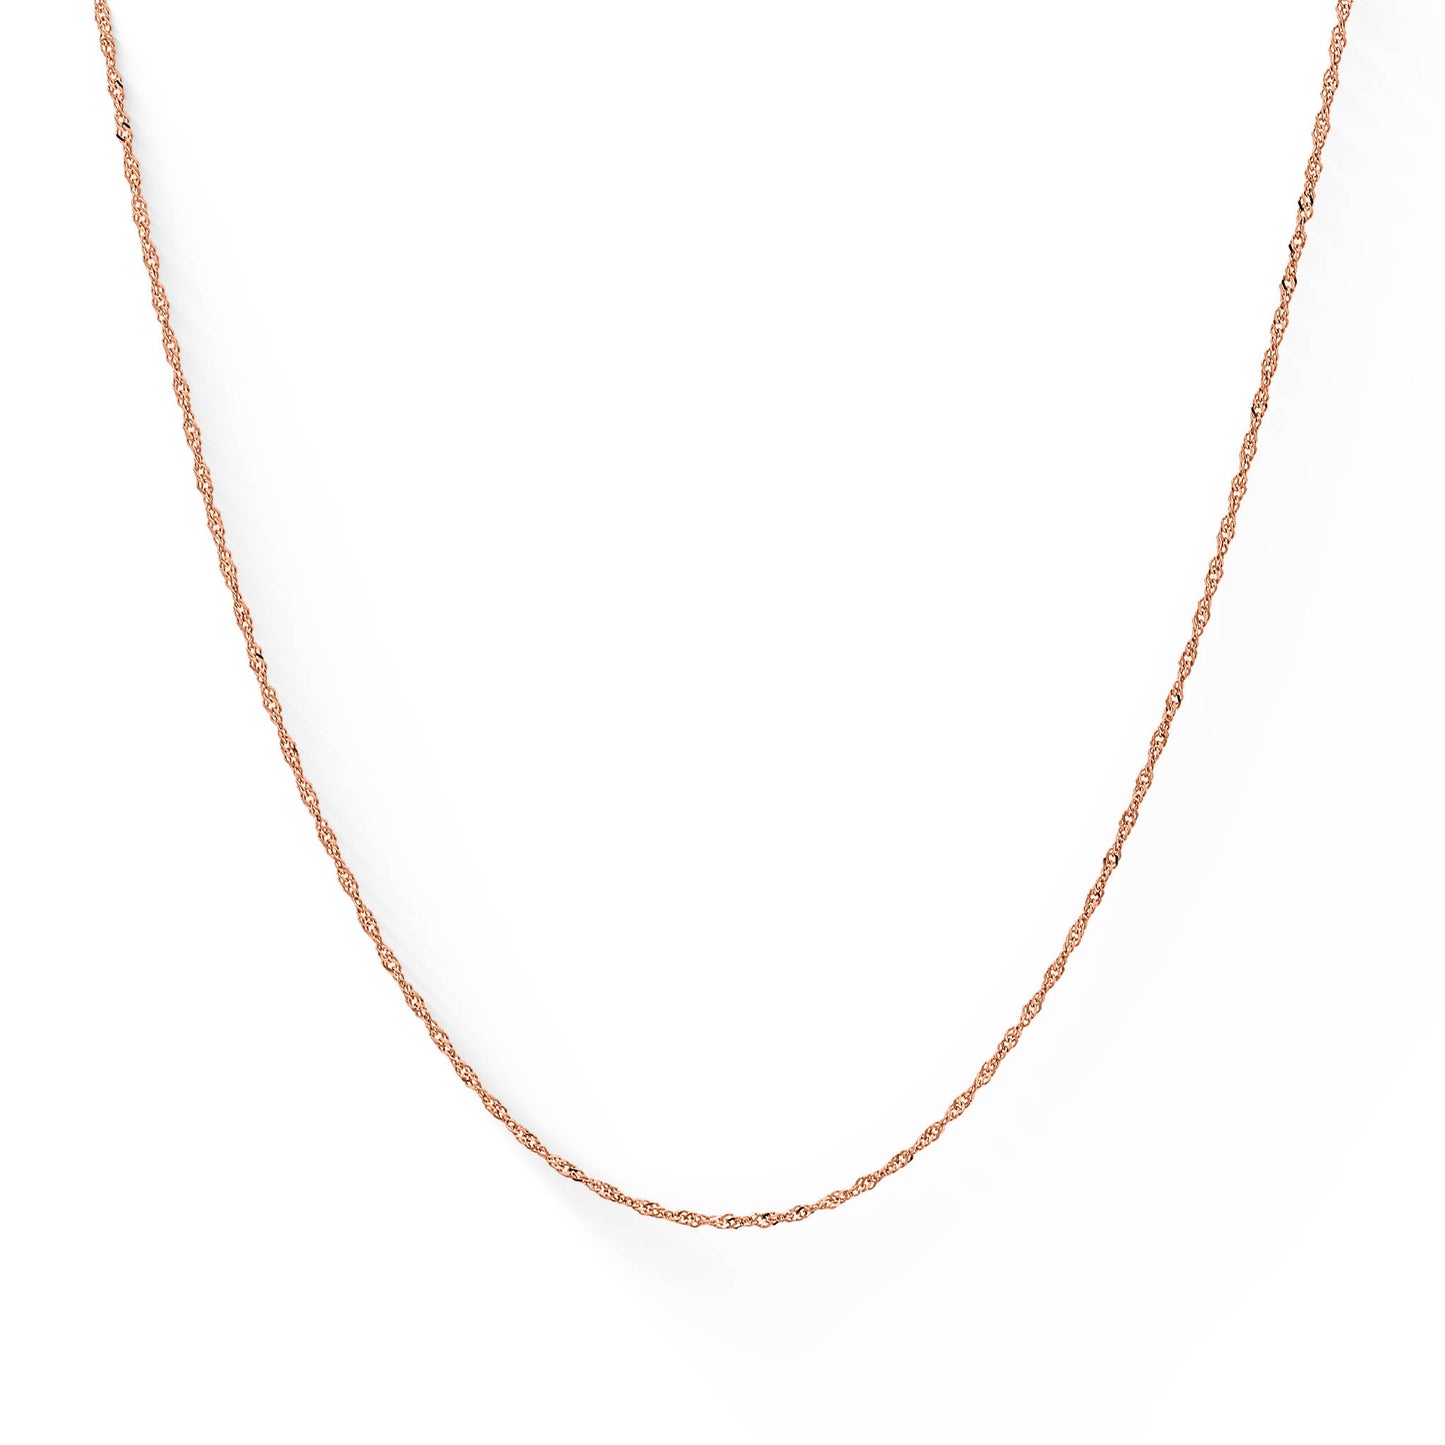 700157 - 14K Rose Gold - 18" Singapore Chain, 1.1mm